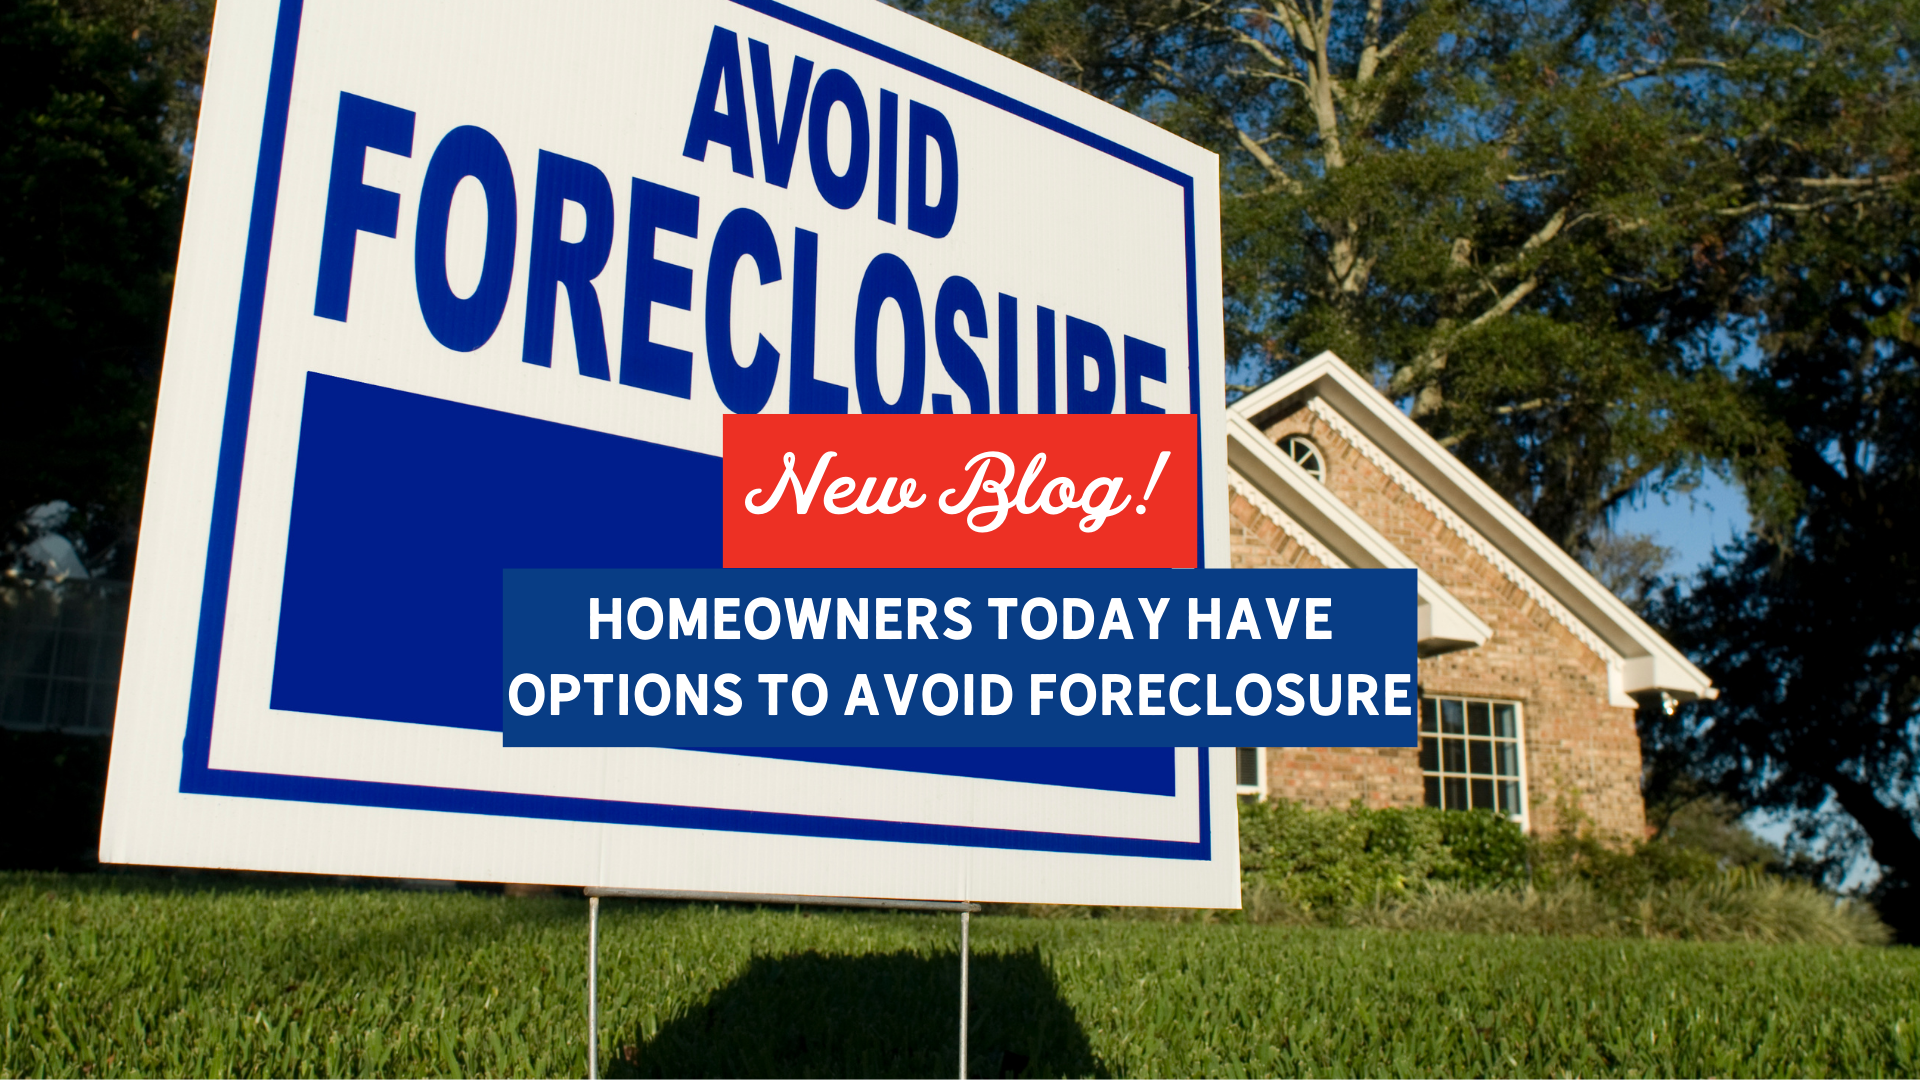 Homeowners Today Have Options To Avoid Foreclosure